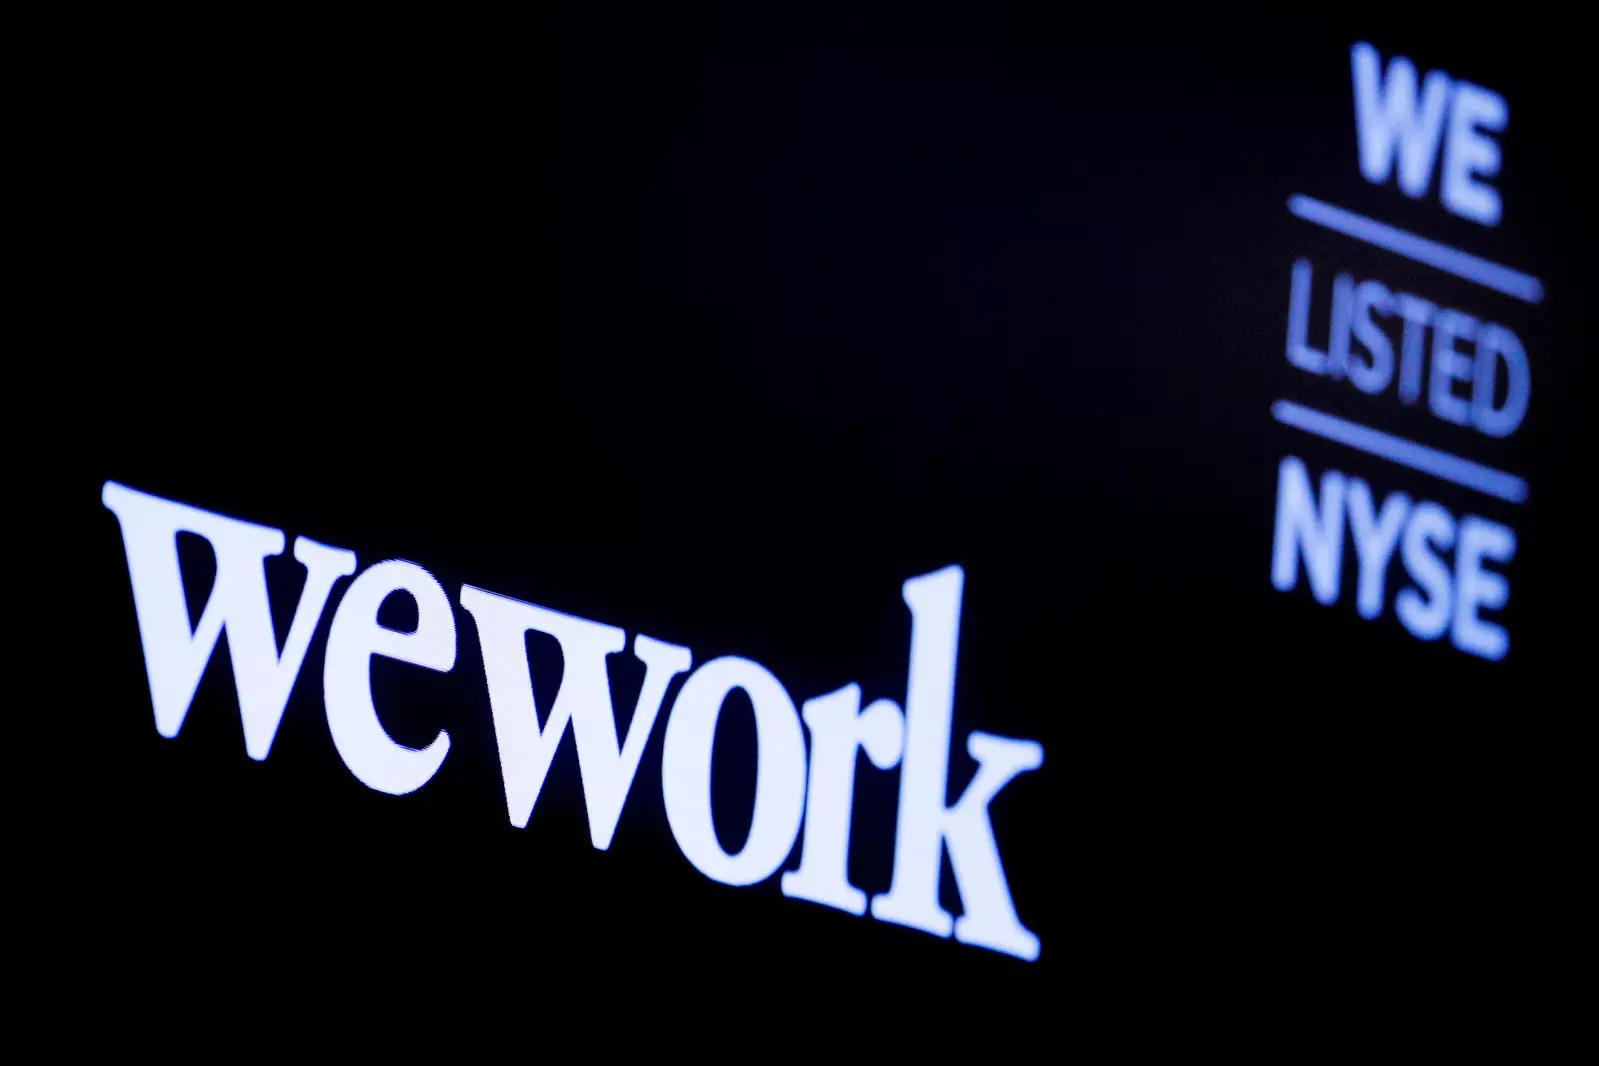 WeWork gets $150 million investment from Cushman & Wakefield